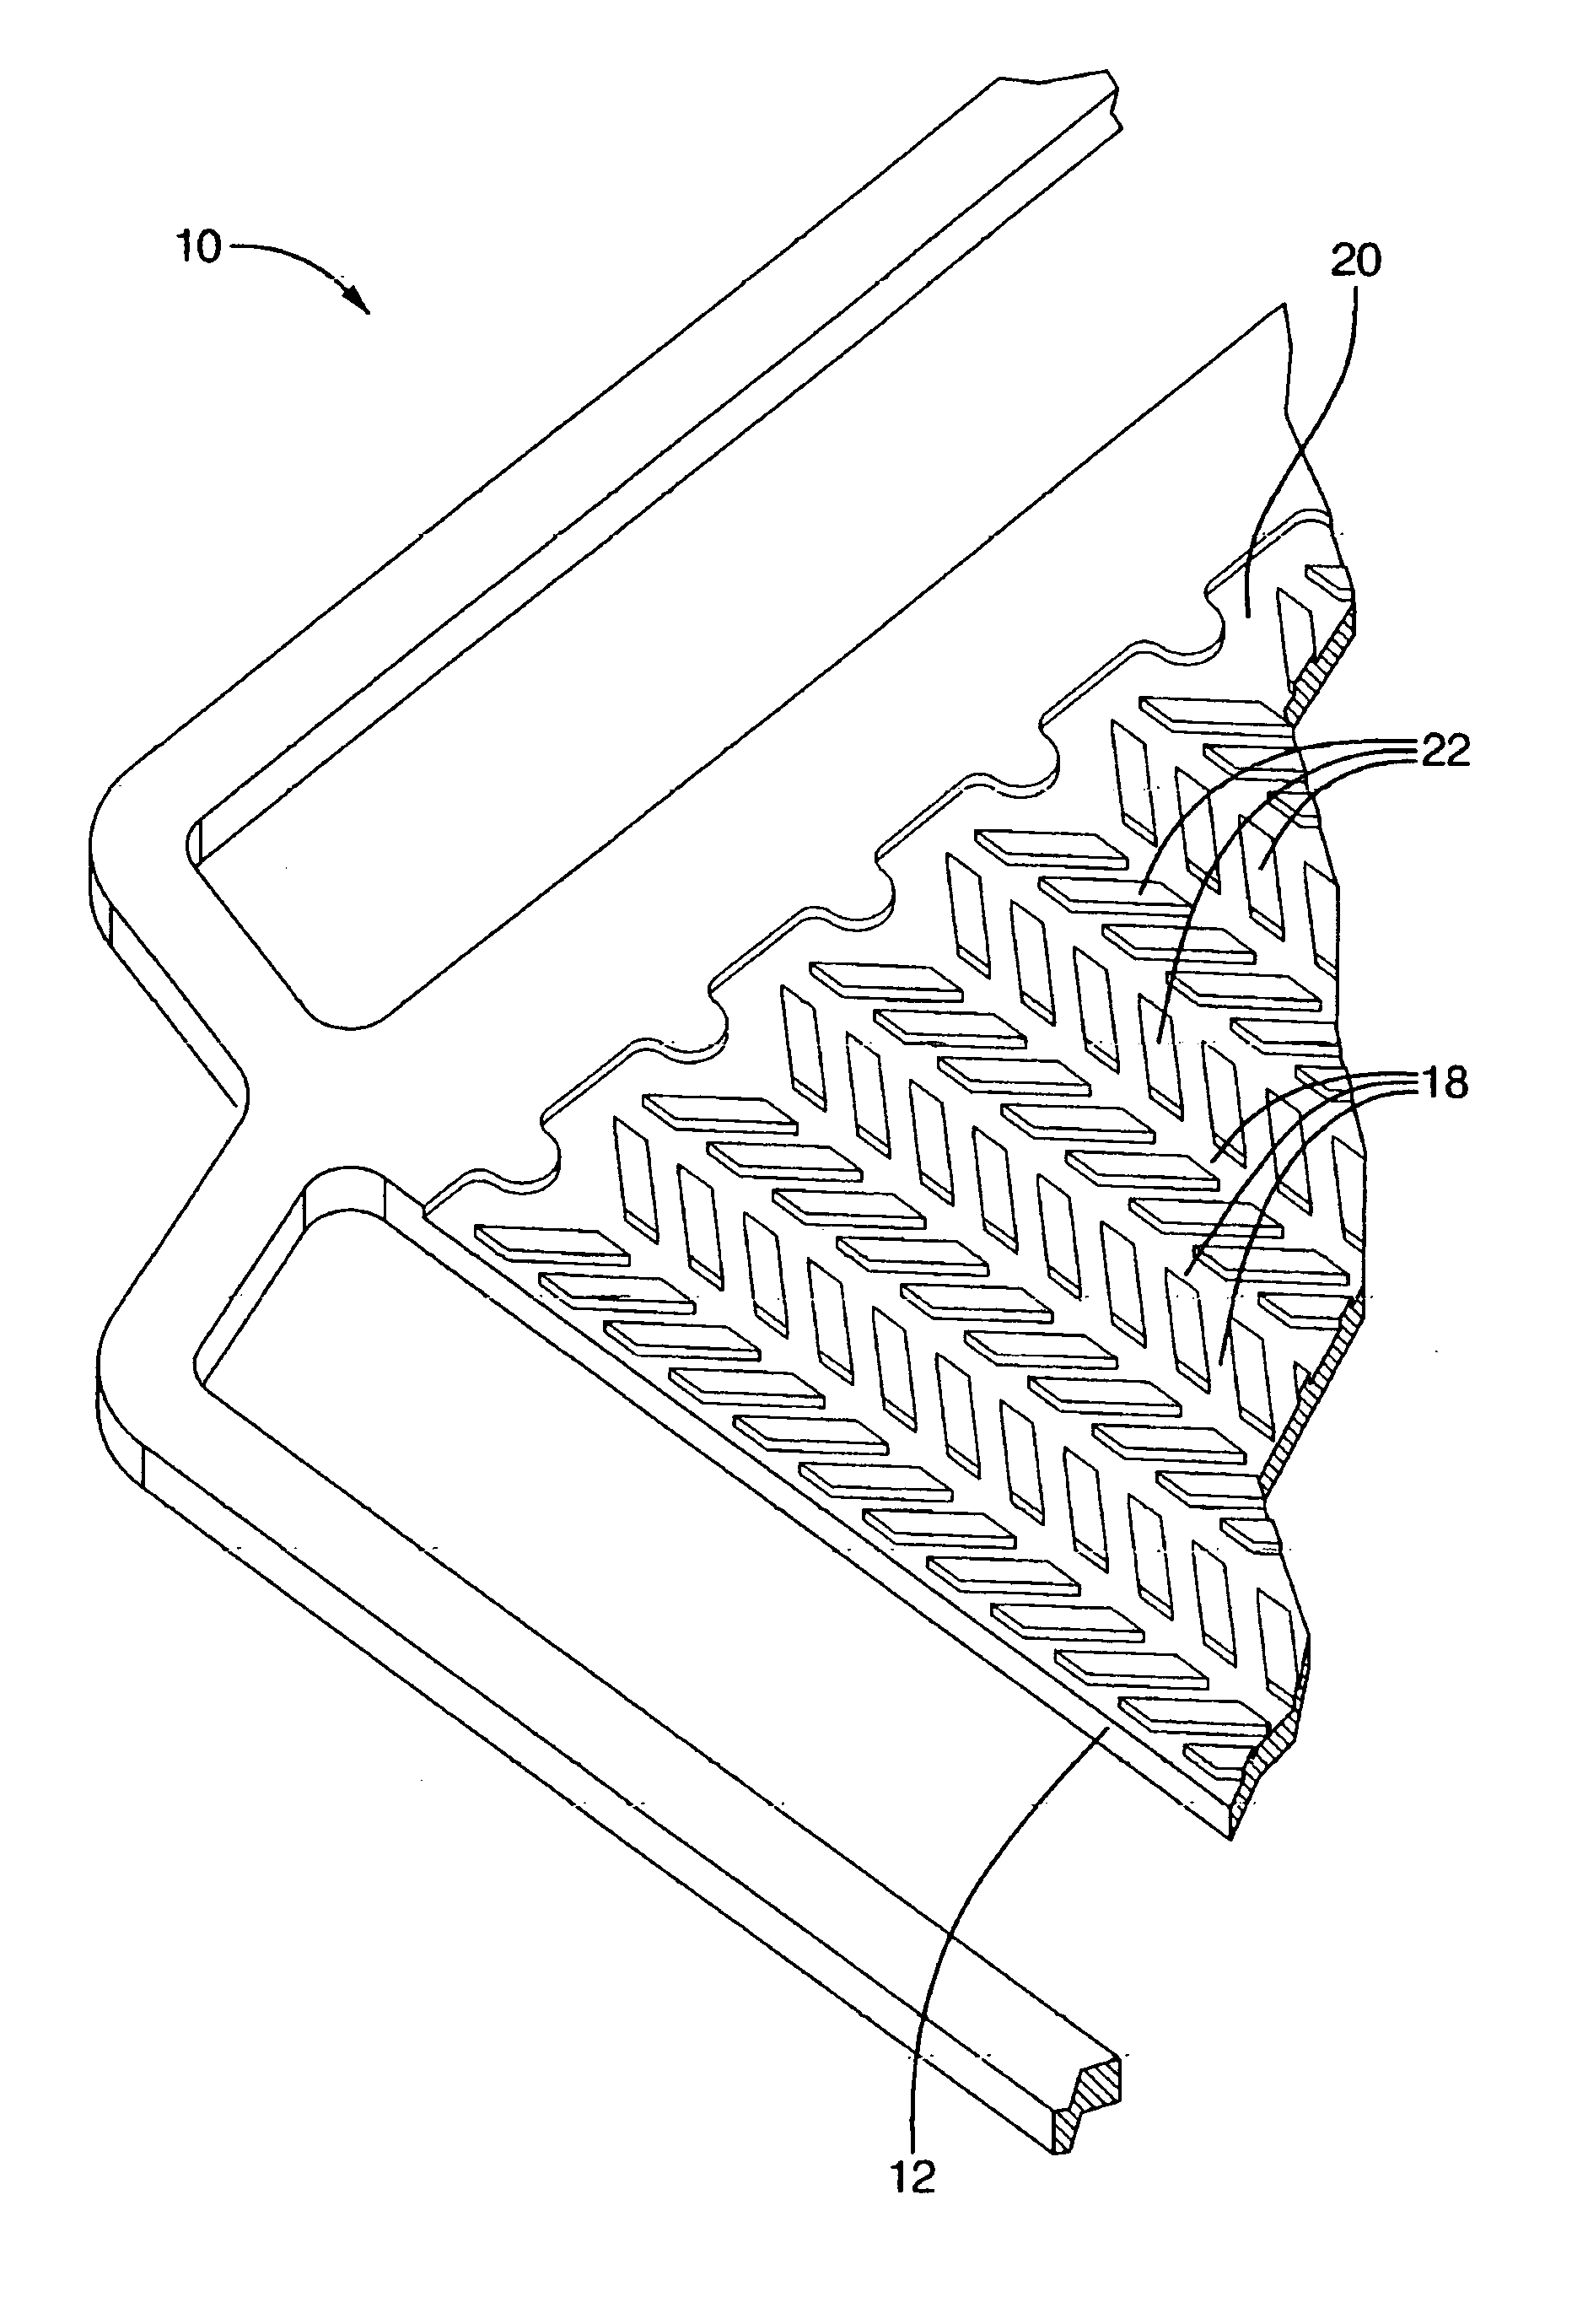 Etched interconnect for fuel cell elements